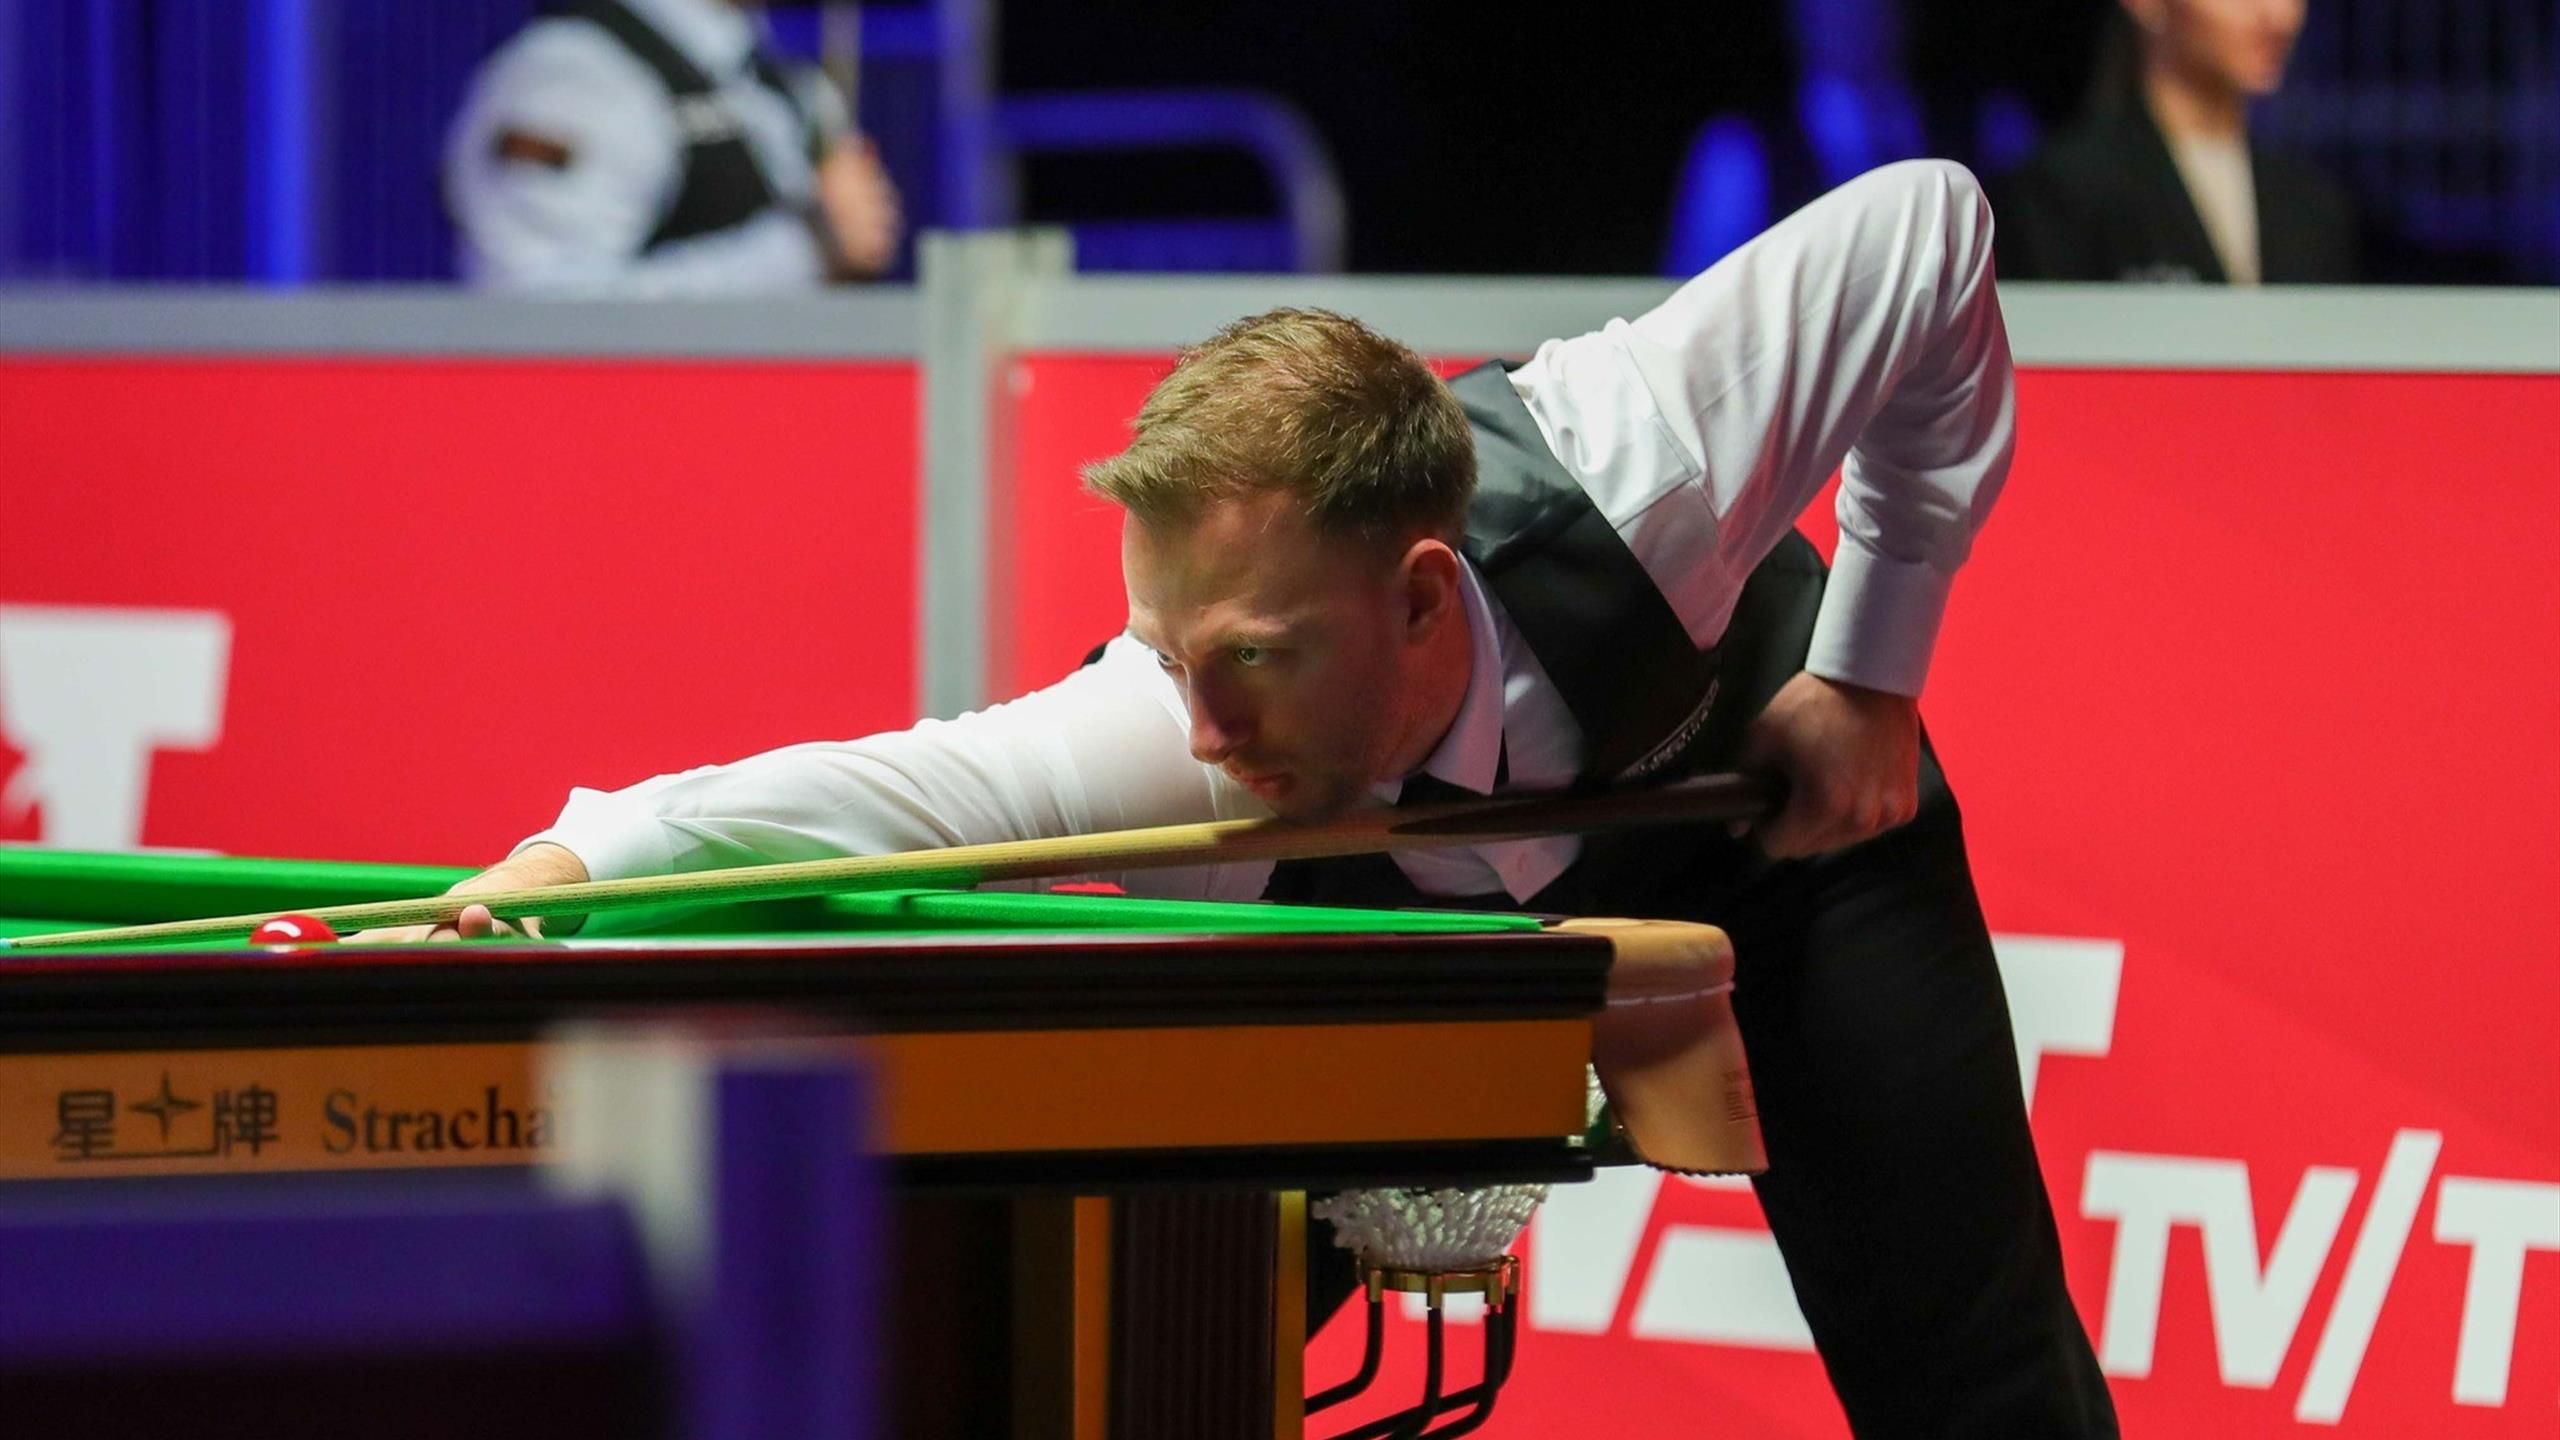 Turkish Masters 2022 snooker - Latest results, scores, schedule - Judd Trump, Mark Williams and John Higgins